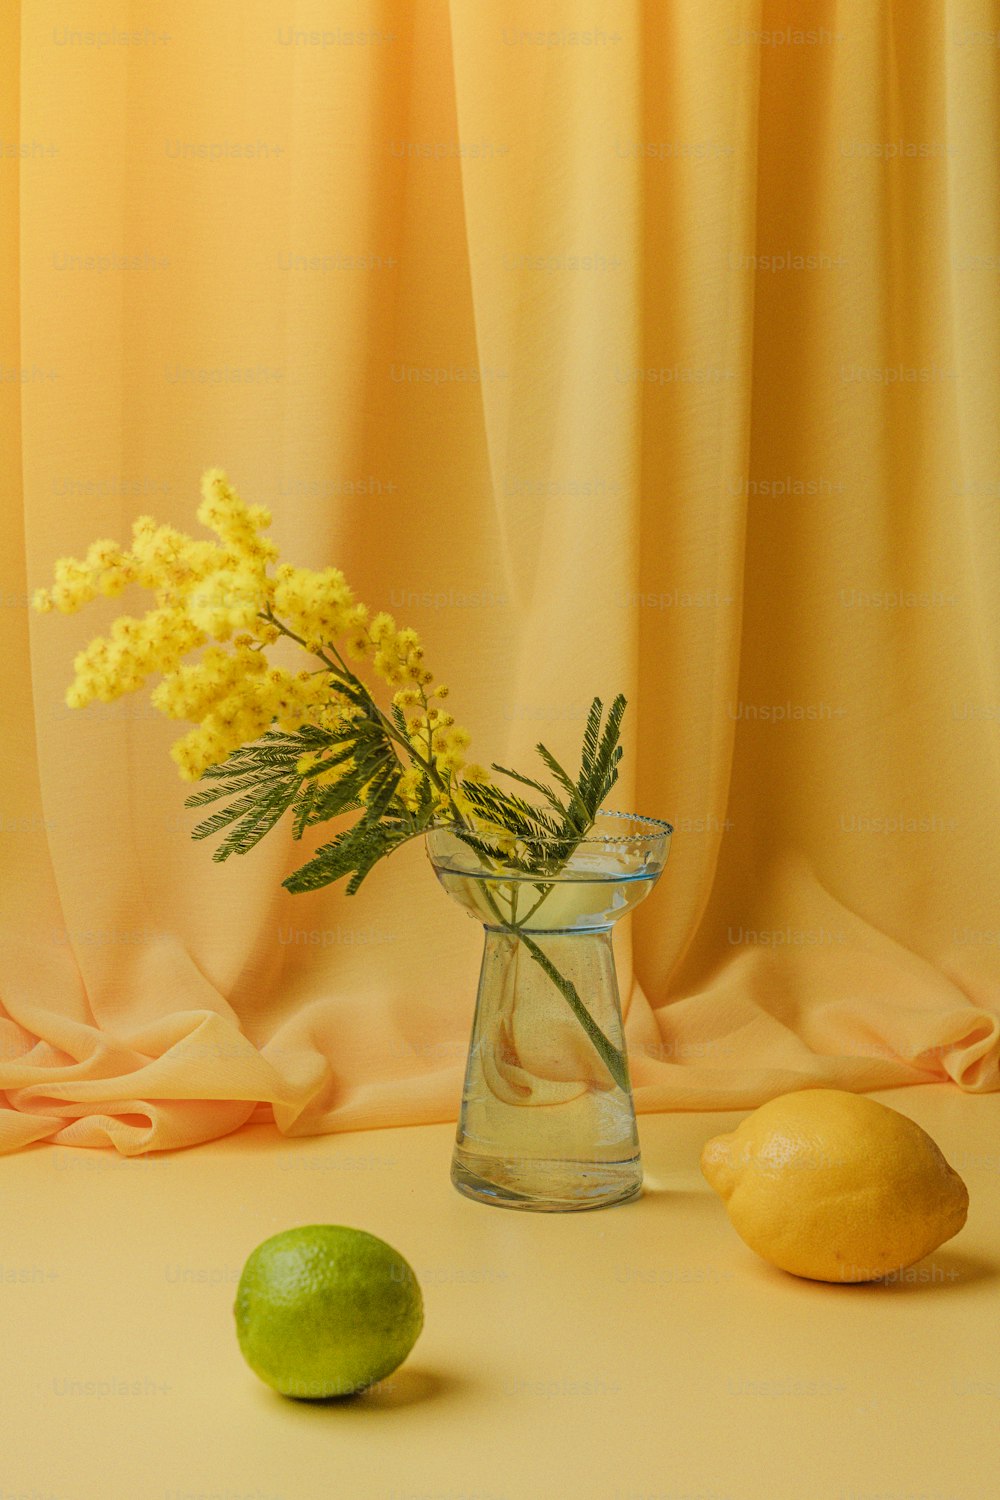 a glass vase filled with yellow flowers next to lemons